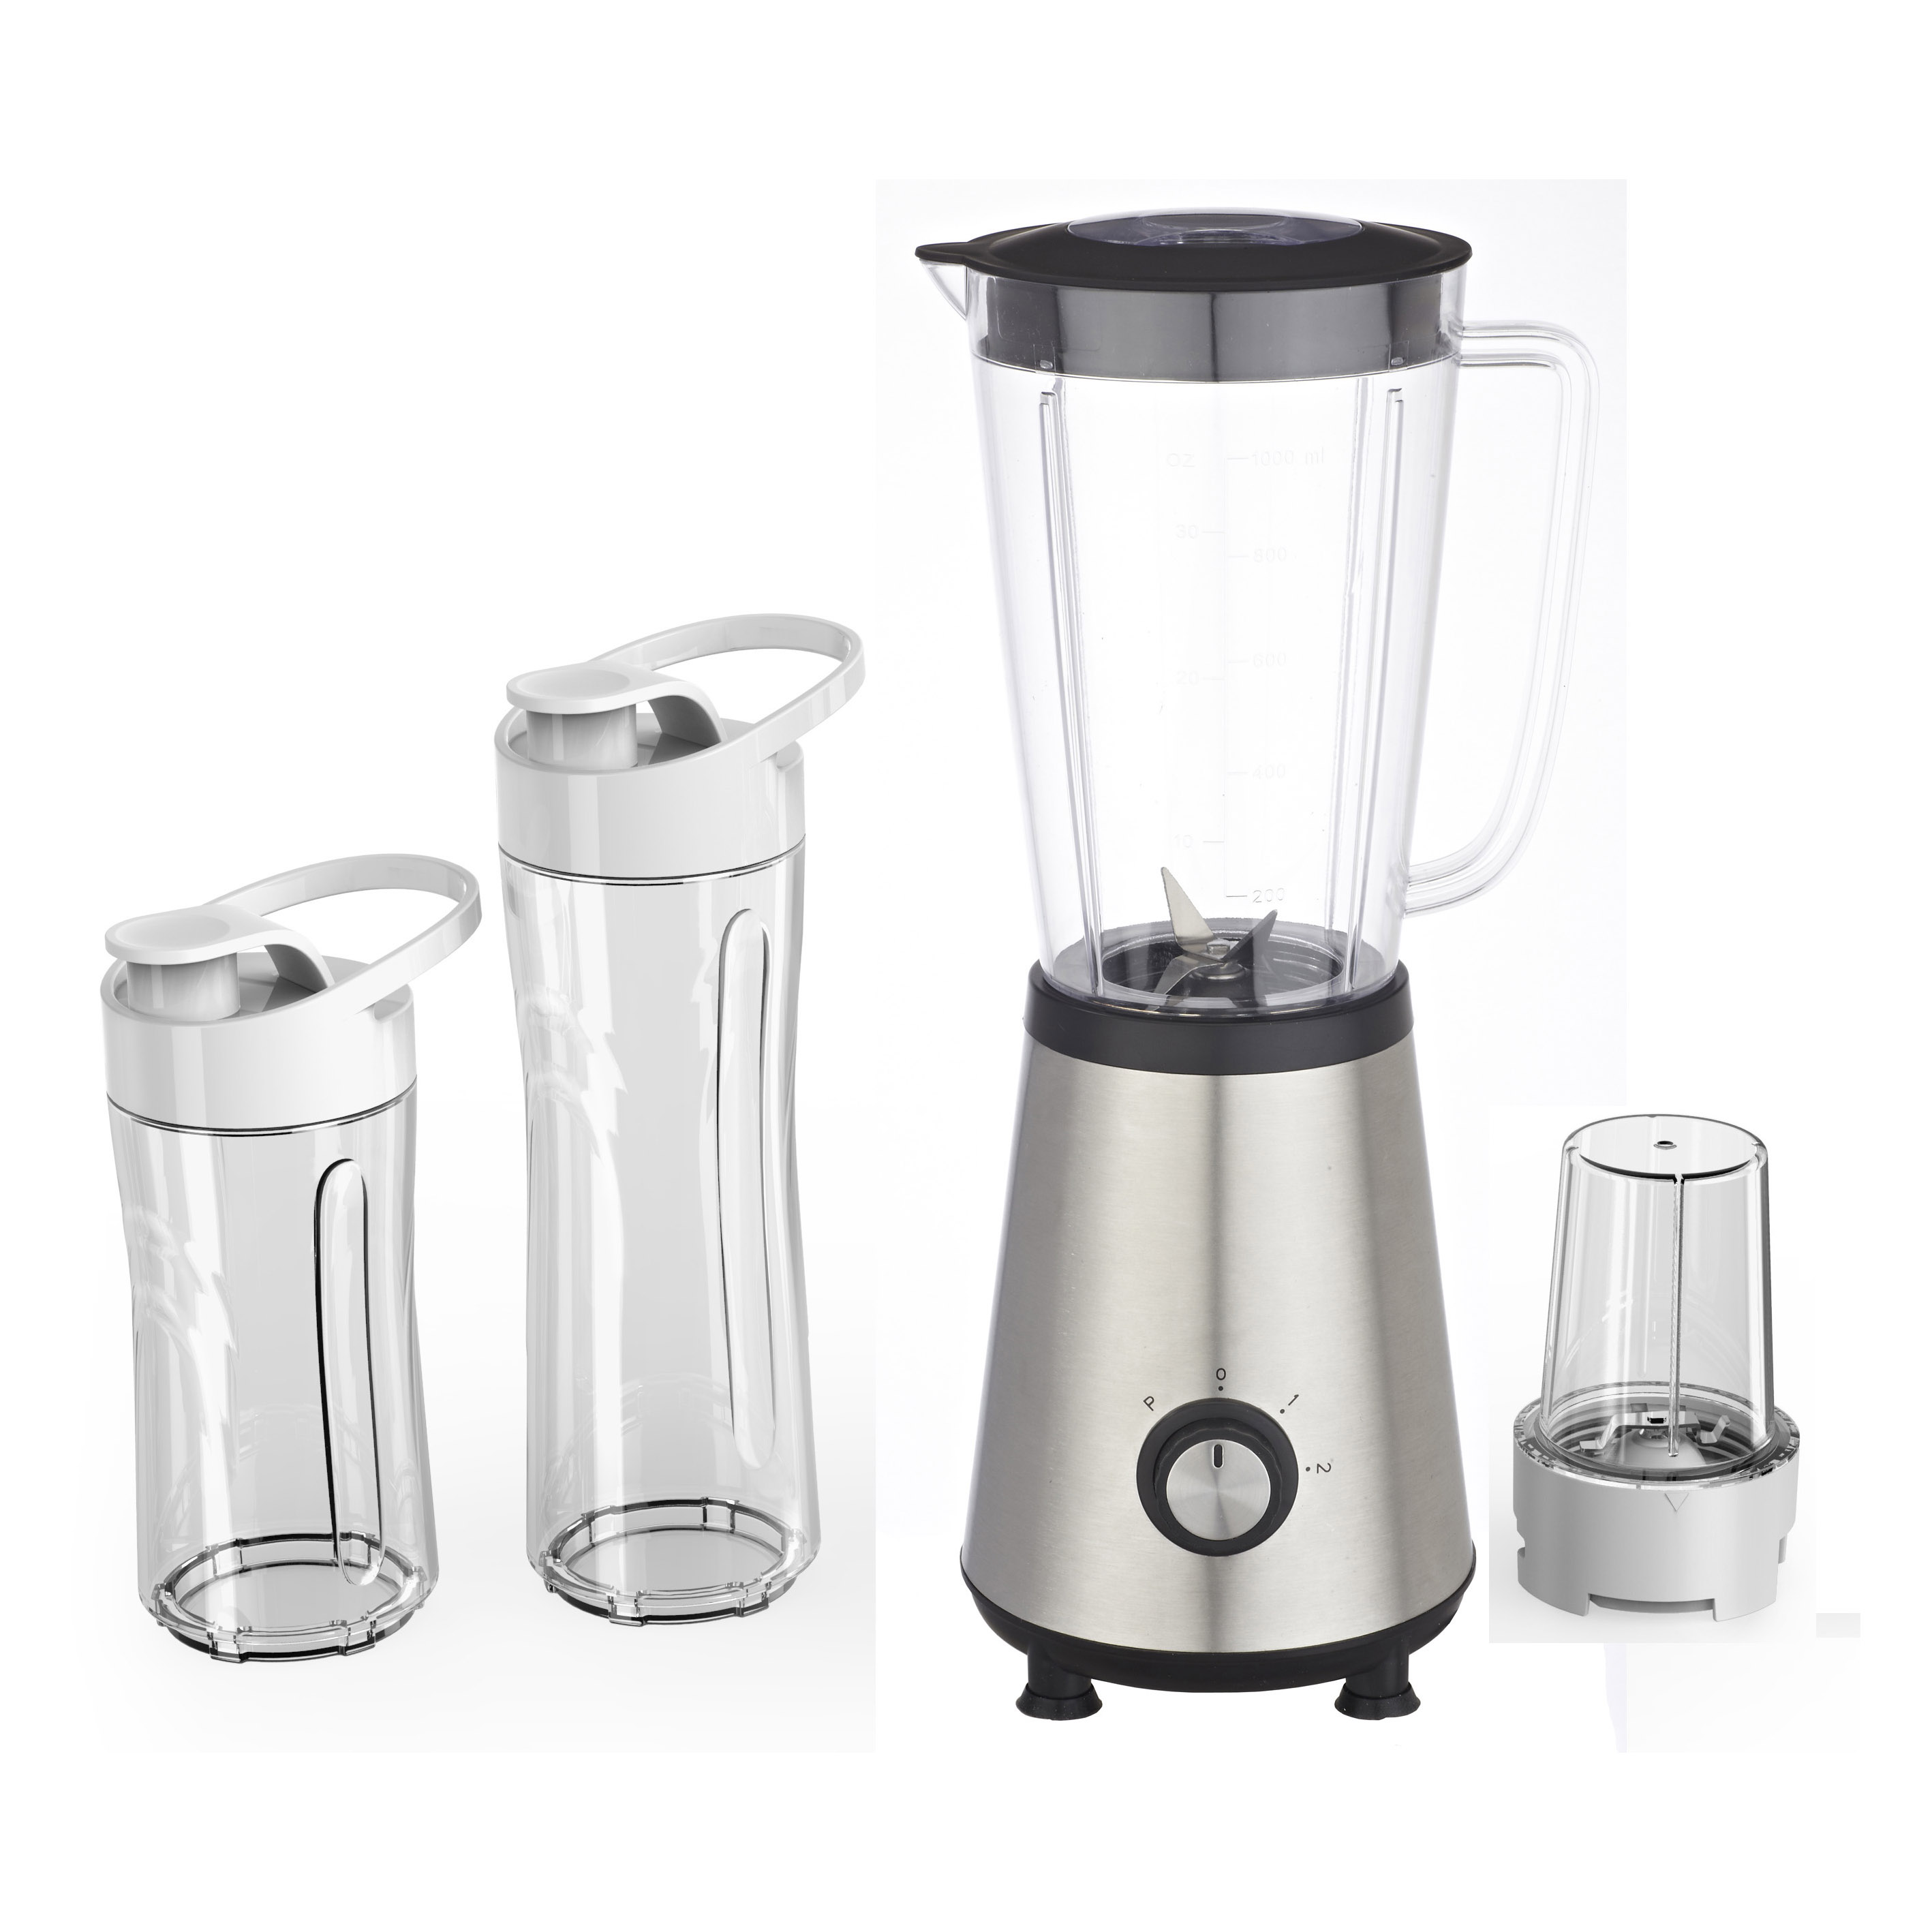 AM-1383B Table/stand blender